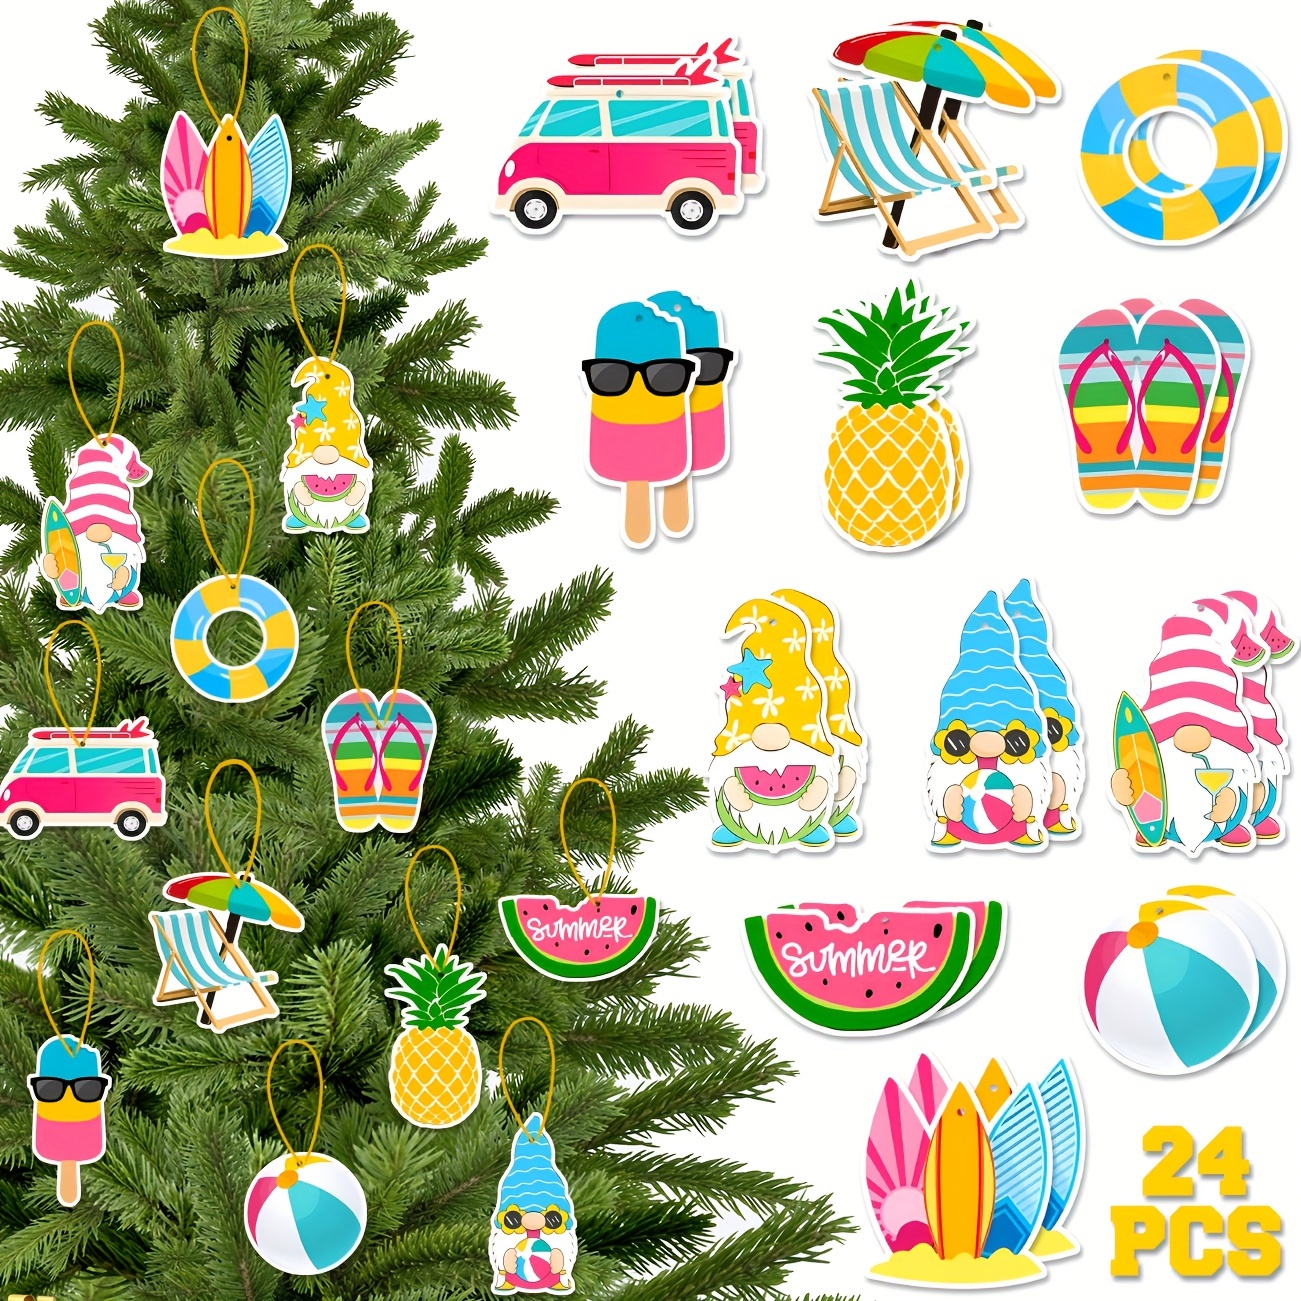 Buy 30 Pcs Wood Hanging Ornaments Beach Wooden Slices Hanging Spring Tree  Ornaments Summer Ornaments Summer Tree Decorations with String for Luau Party  Supplies Hawaiian Party Decorations (Vivid Style) Online at Low